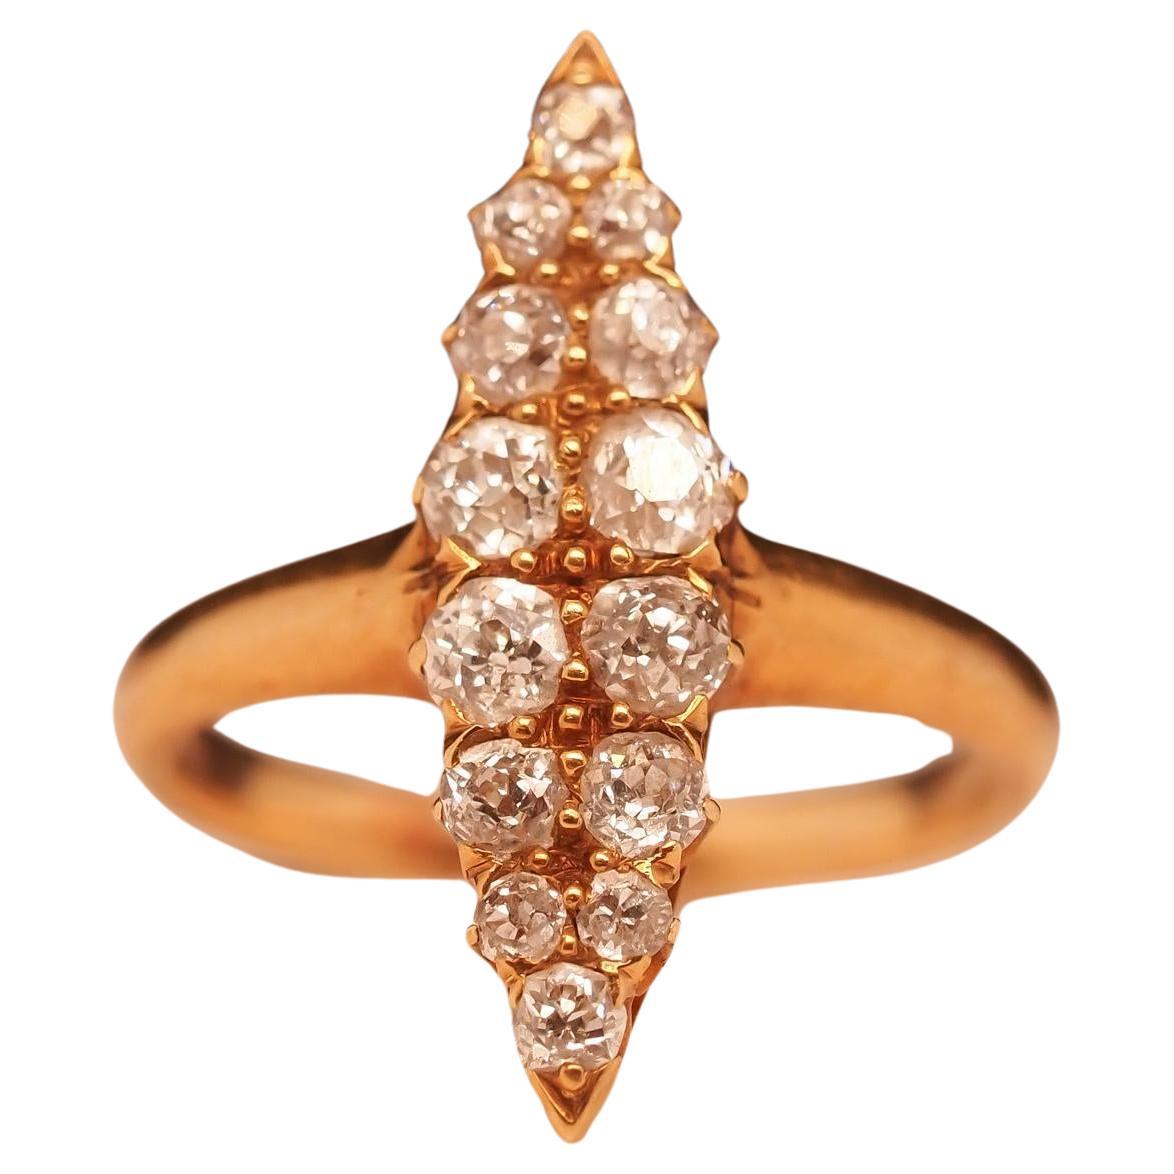 Circa 1900s Edwardian 18K Yellow Gold Navette Ring with Old Mine Diamonds